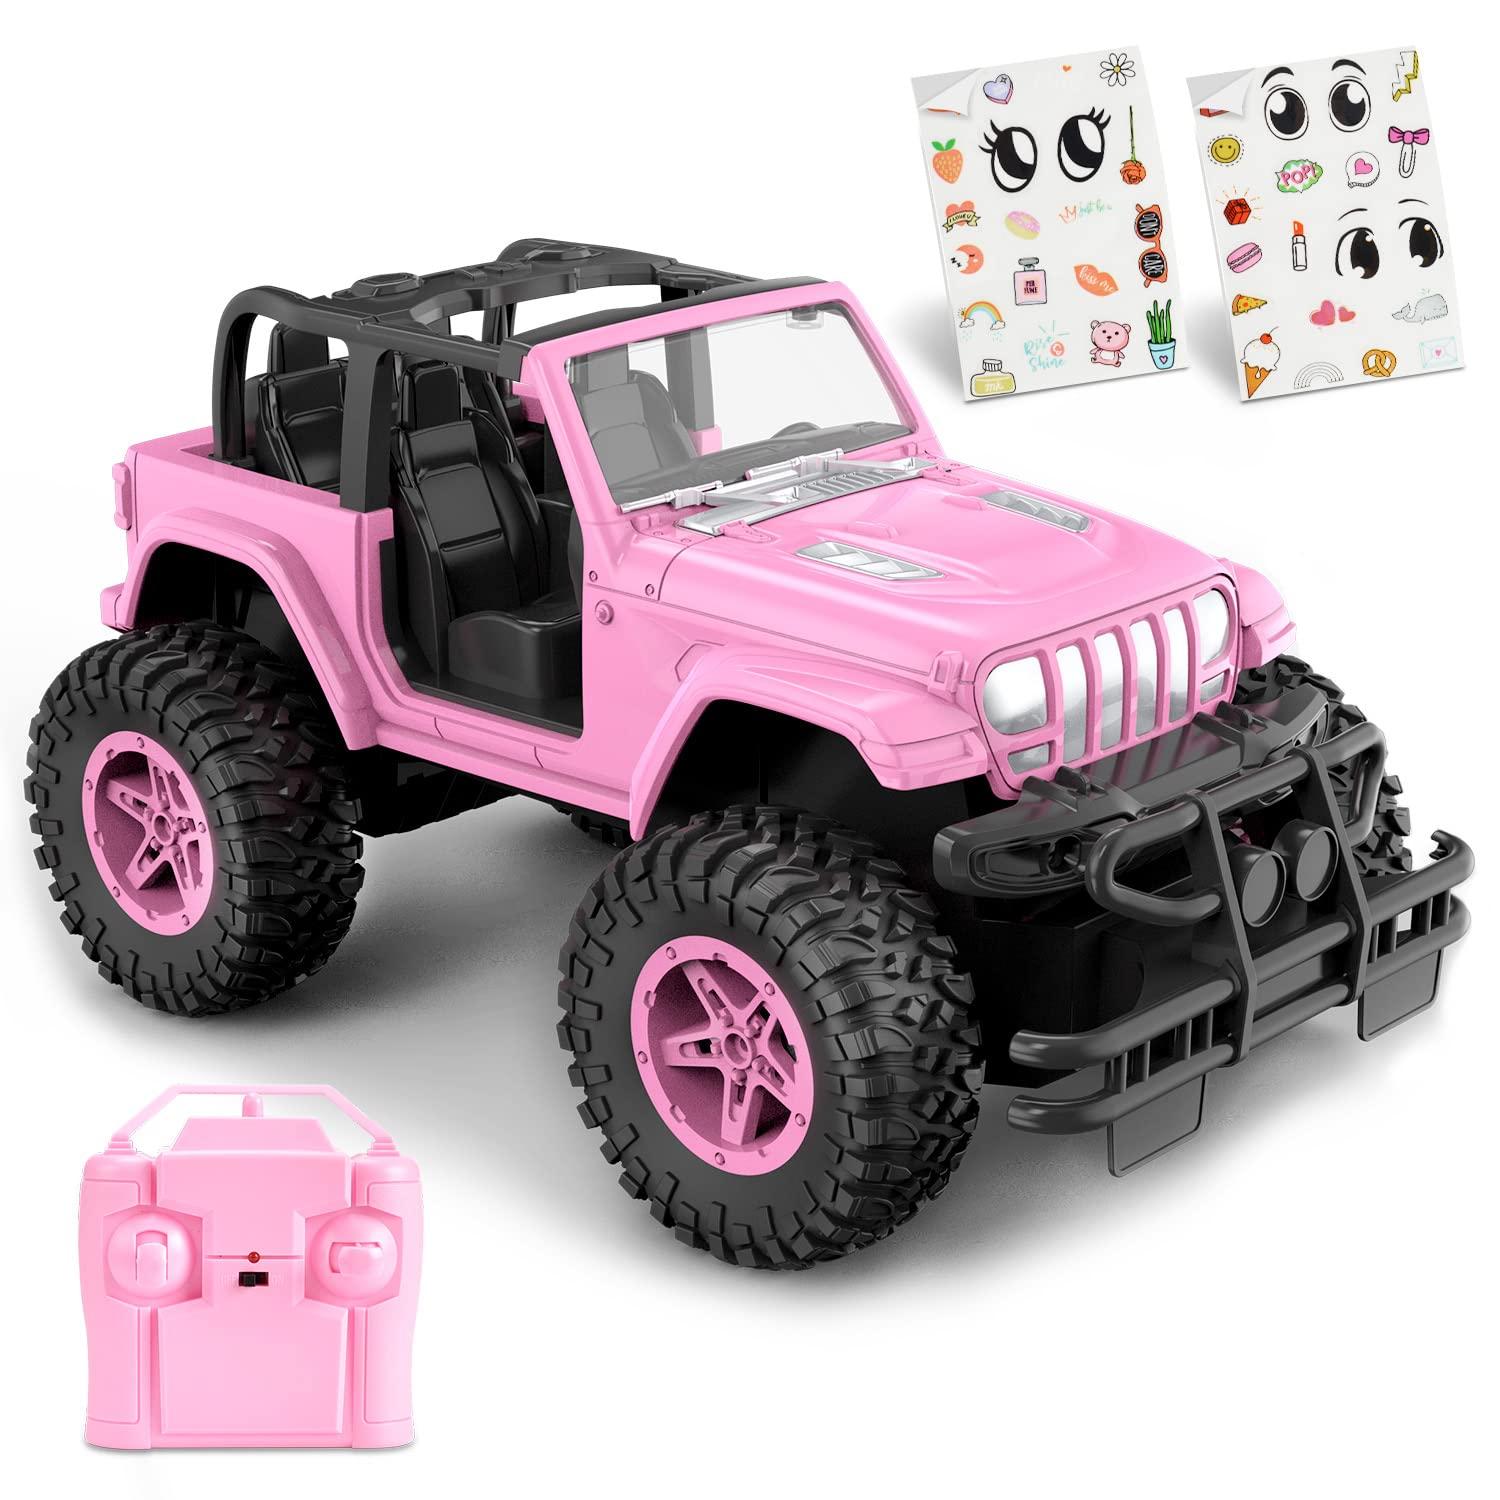 Barbie Rc: Insights from Customer Reviews of Barbie RC Car